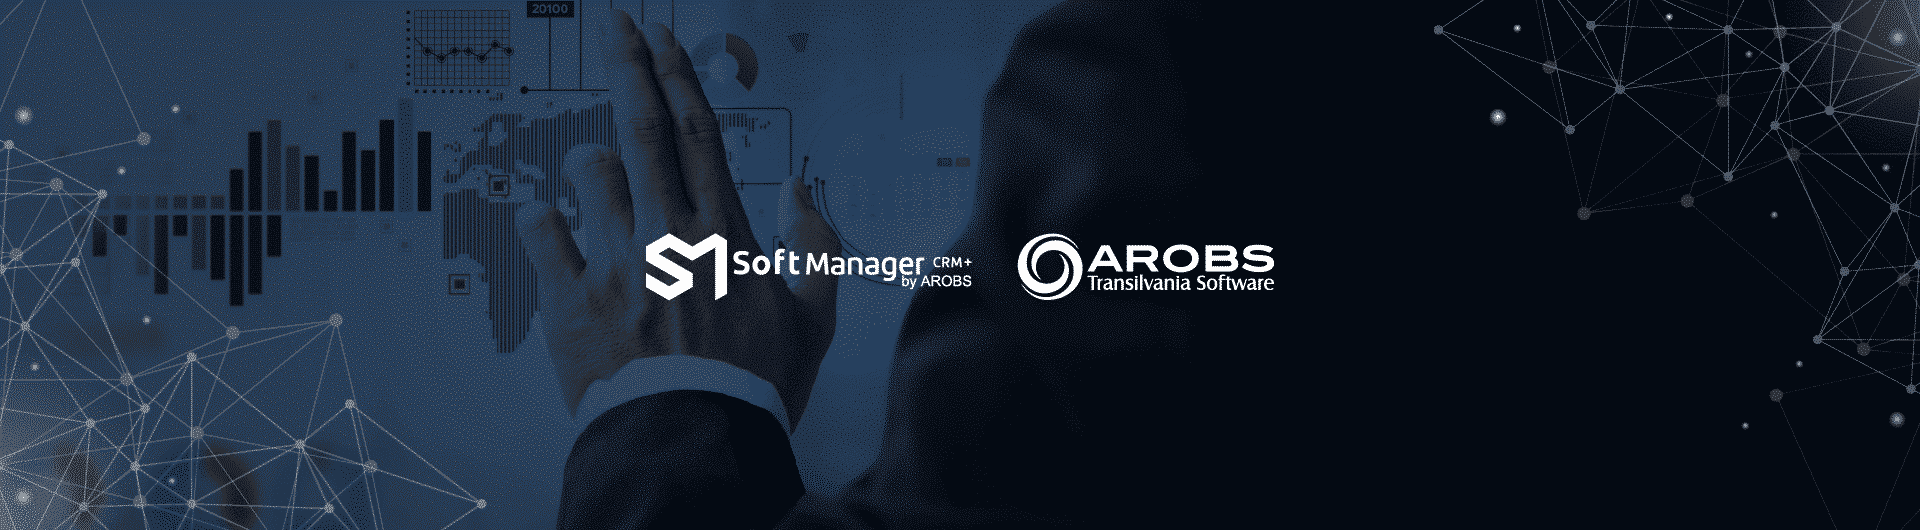 softmanager crm+